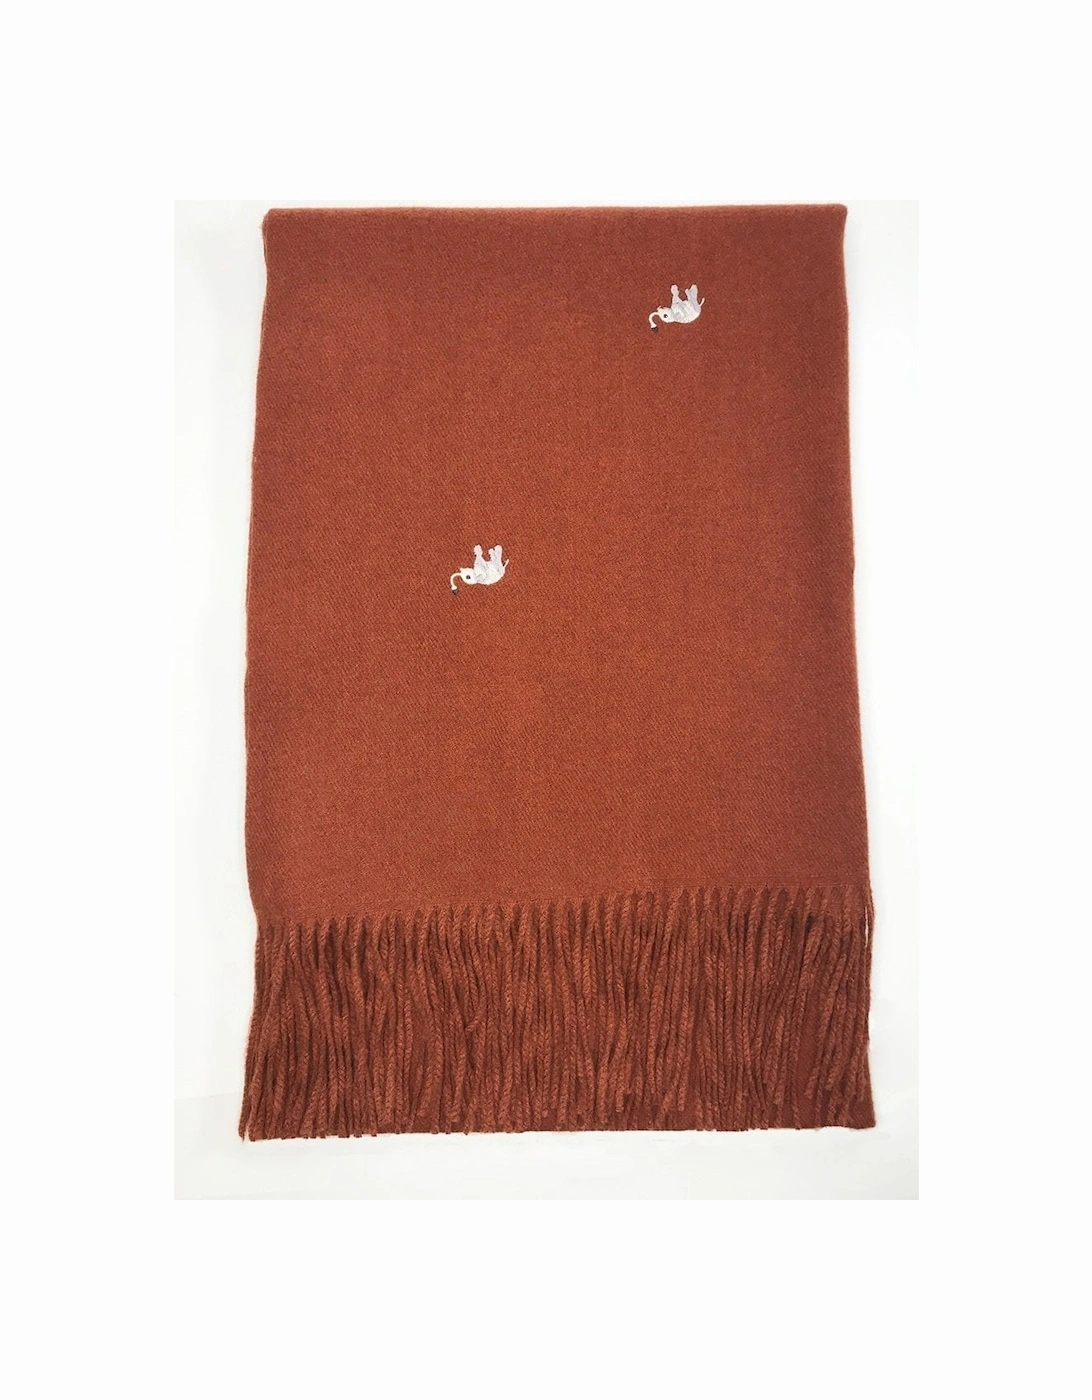 Chocolate Cashmere Blend Wrap with Elephant Embroidery